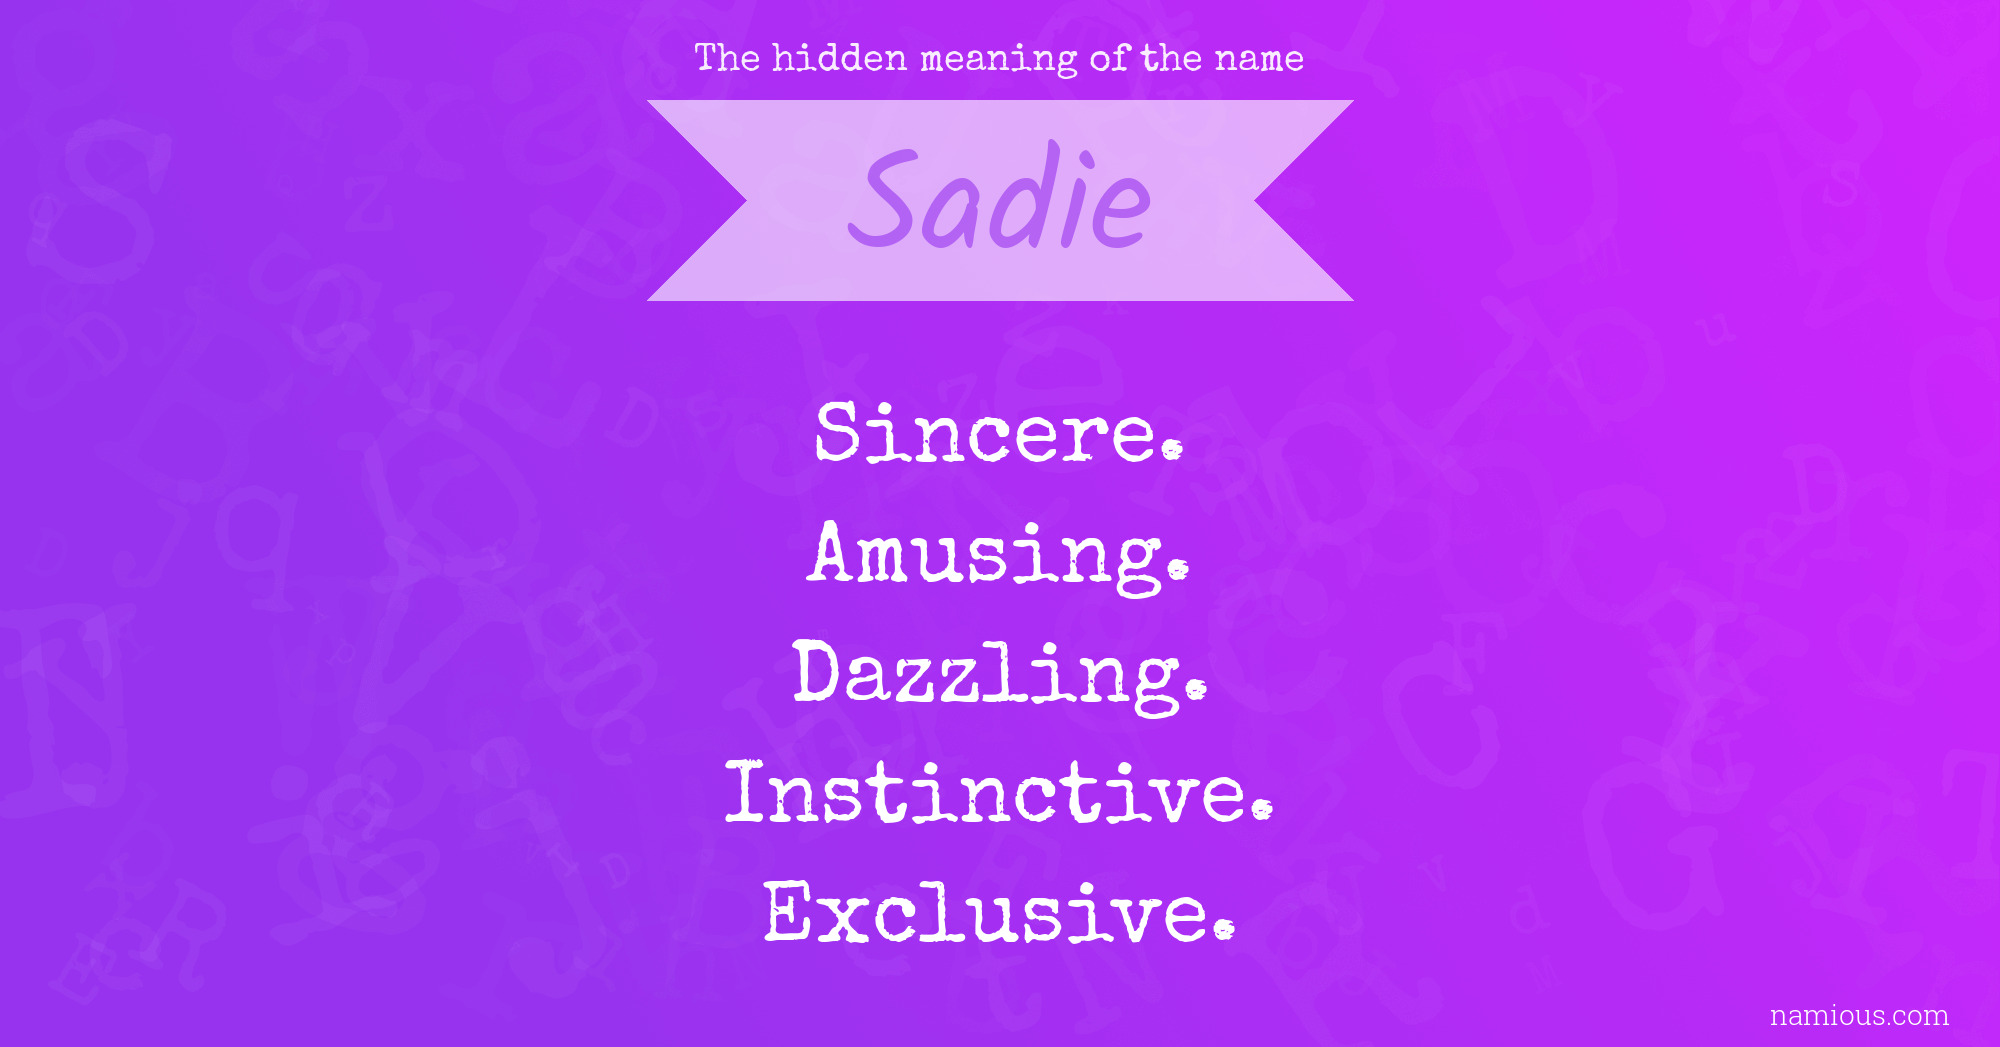 The hidden meaning of the name Sadie